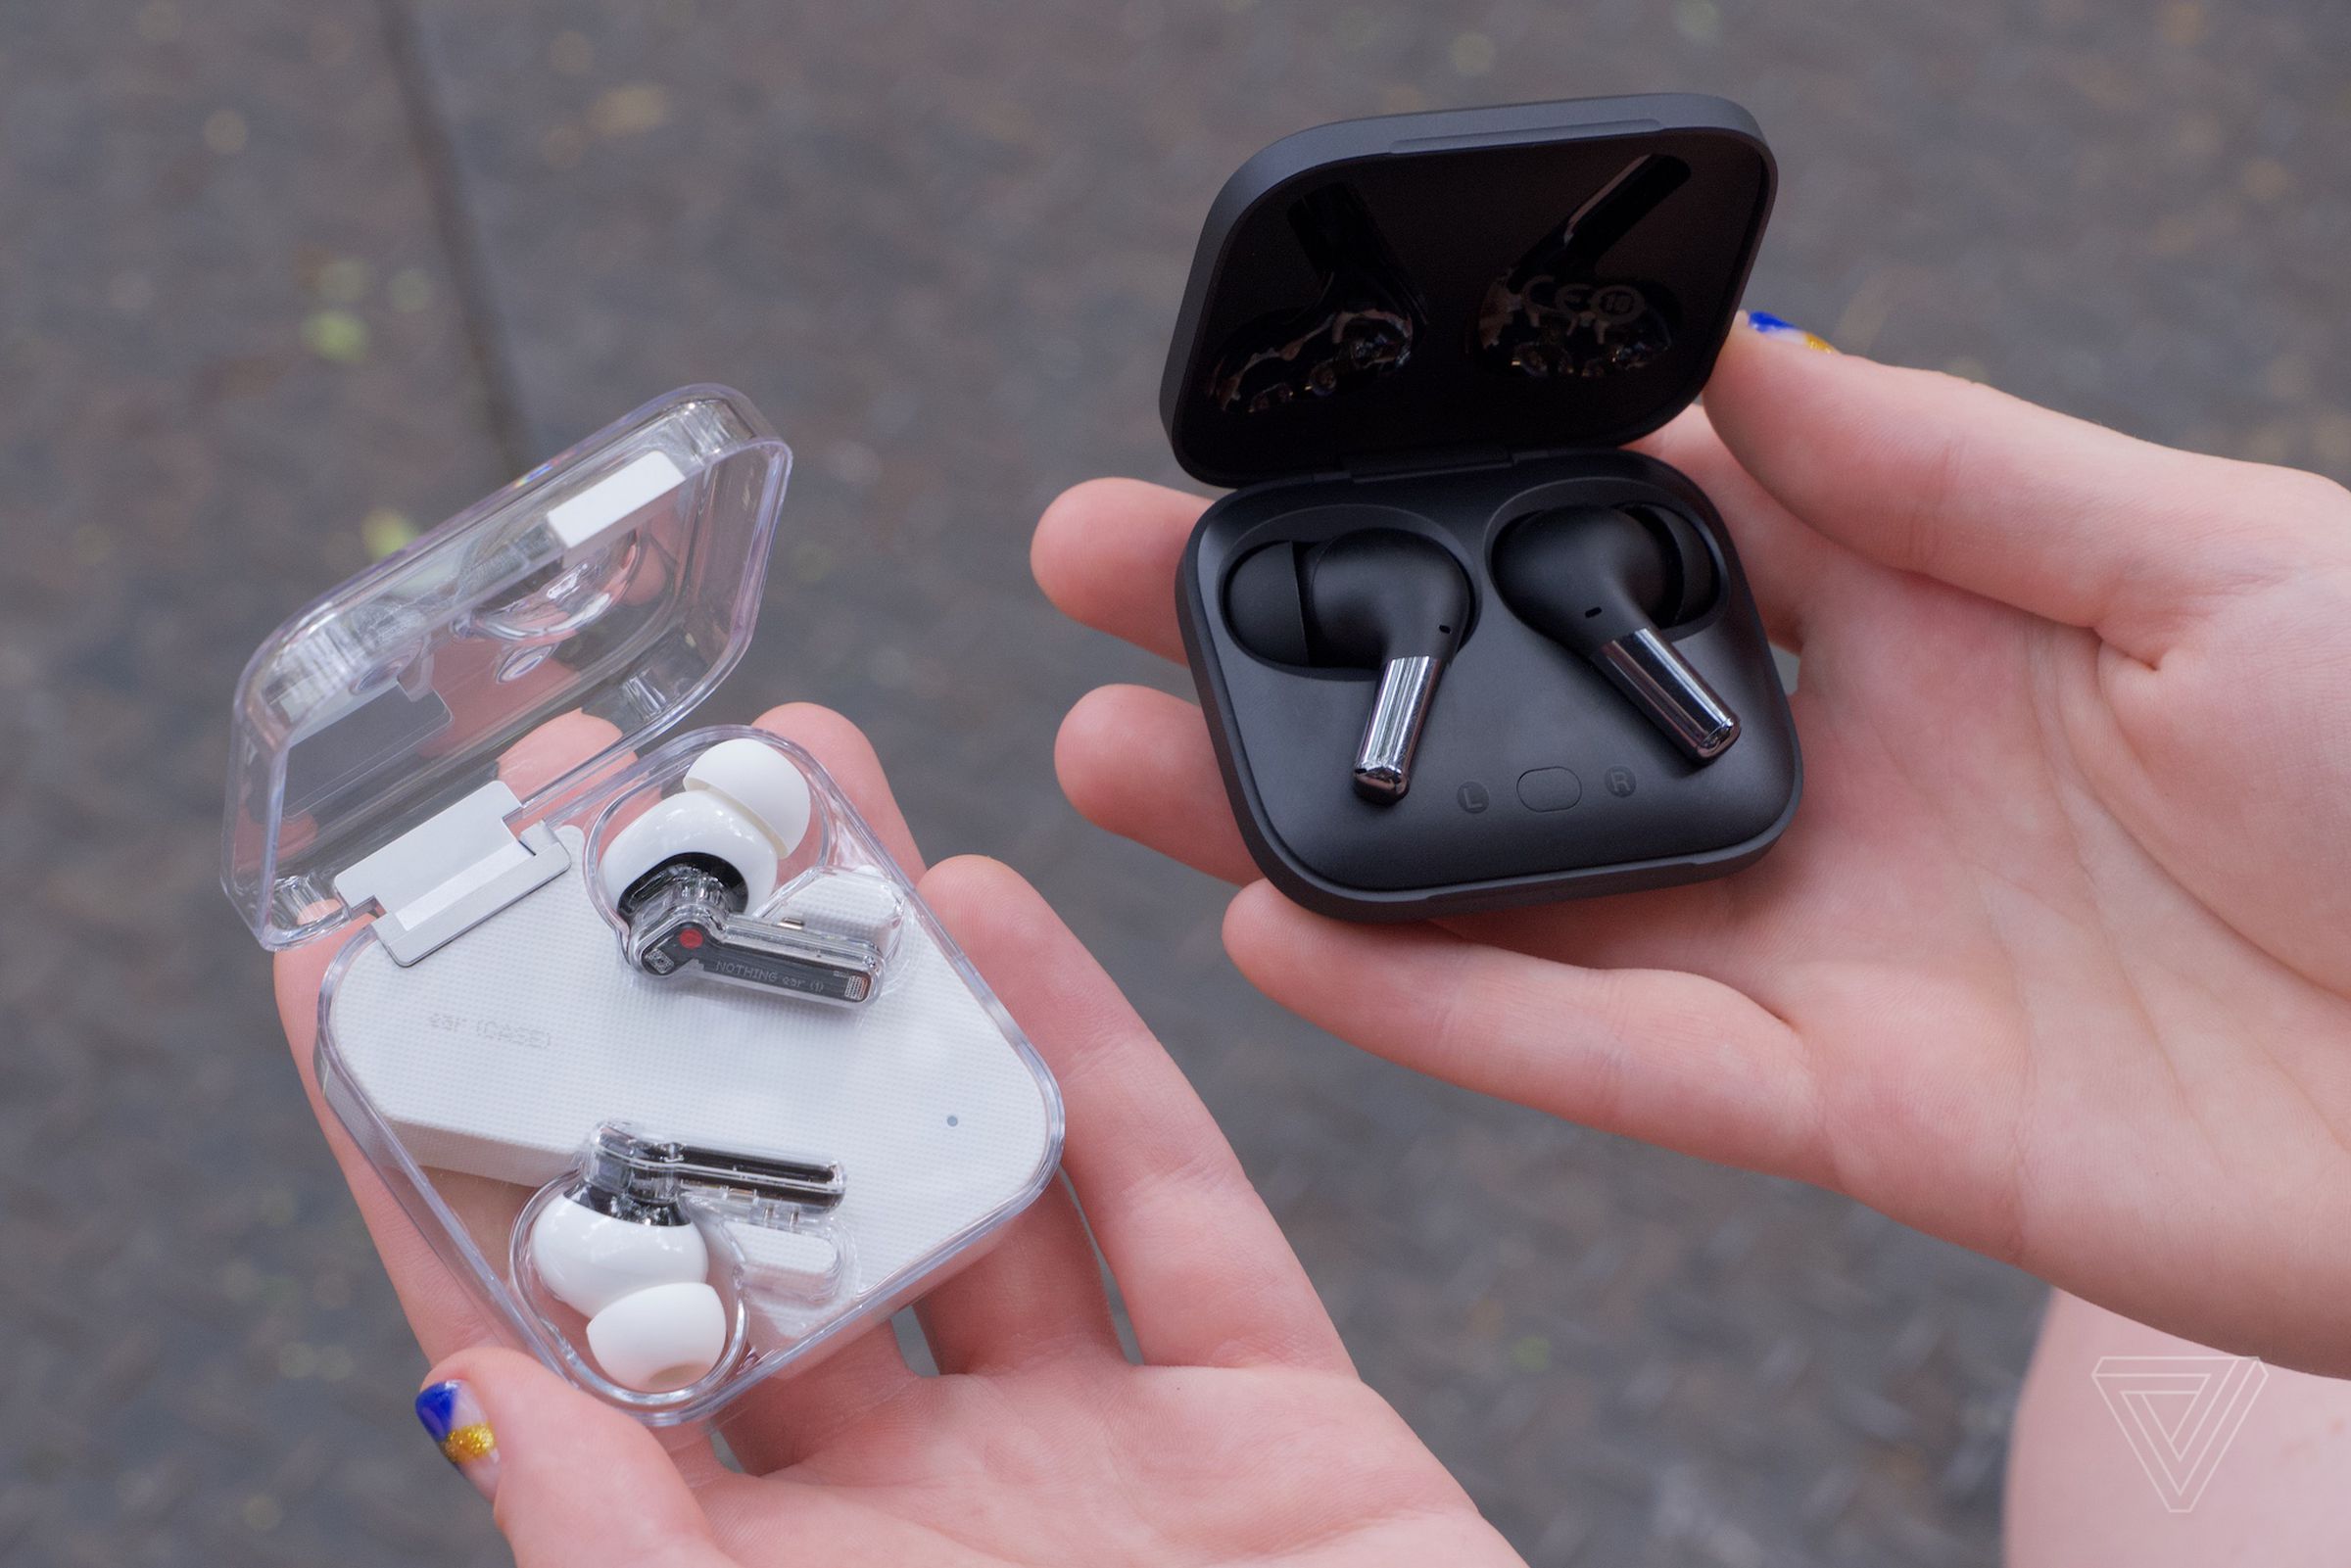 The OnePlus Buds are $50 more expensive than the Nothing Ear 1s (left).